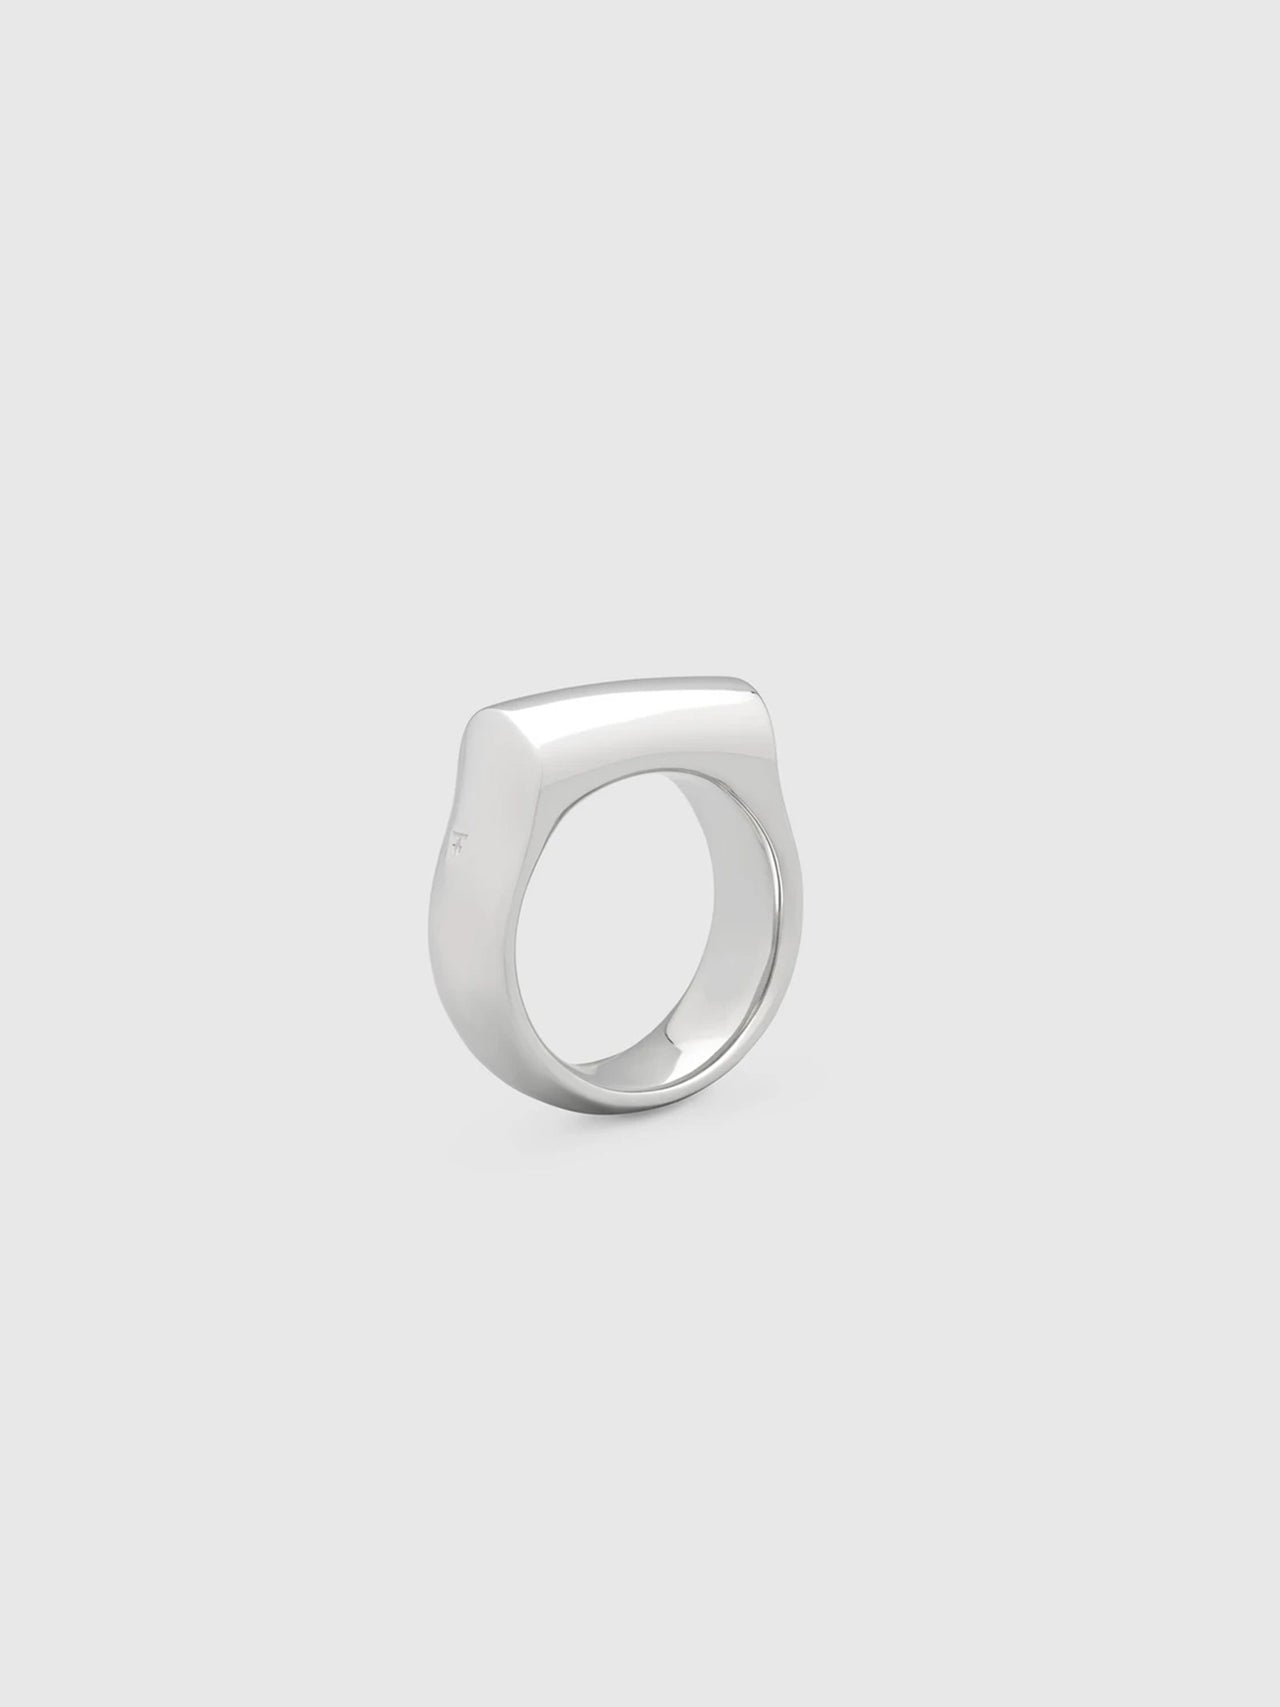 TOMWOOD / Crest Ring (SILVER)